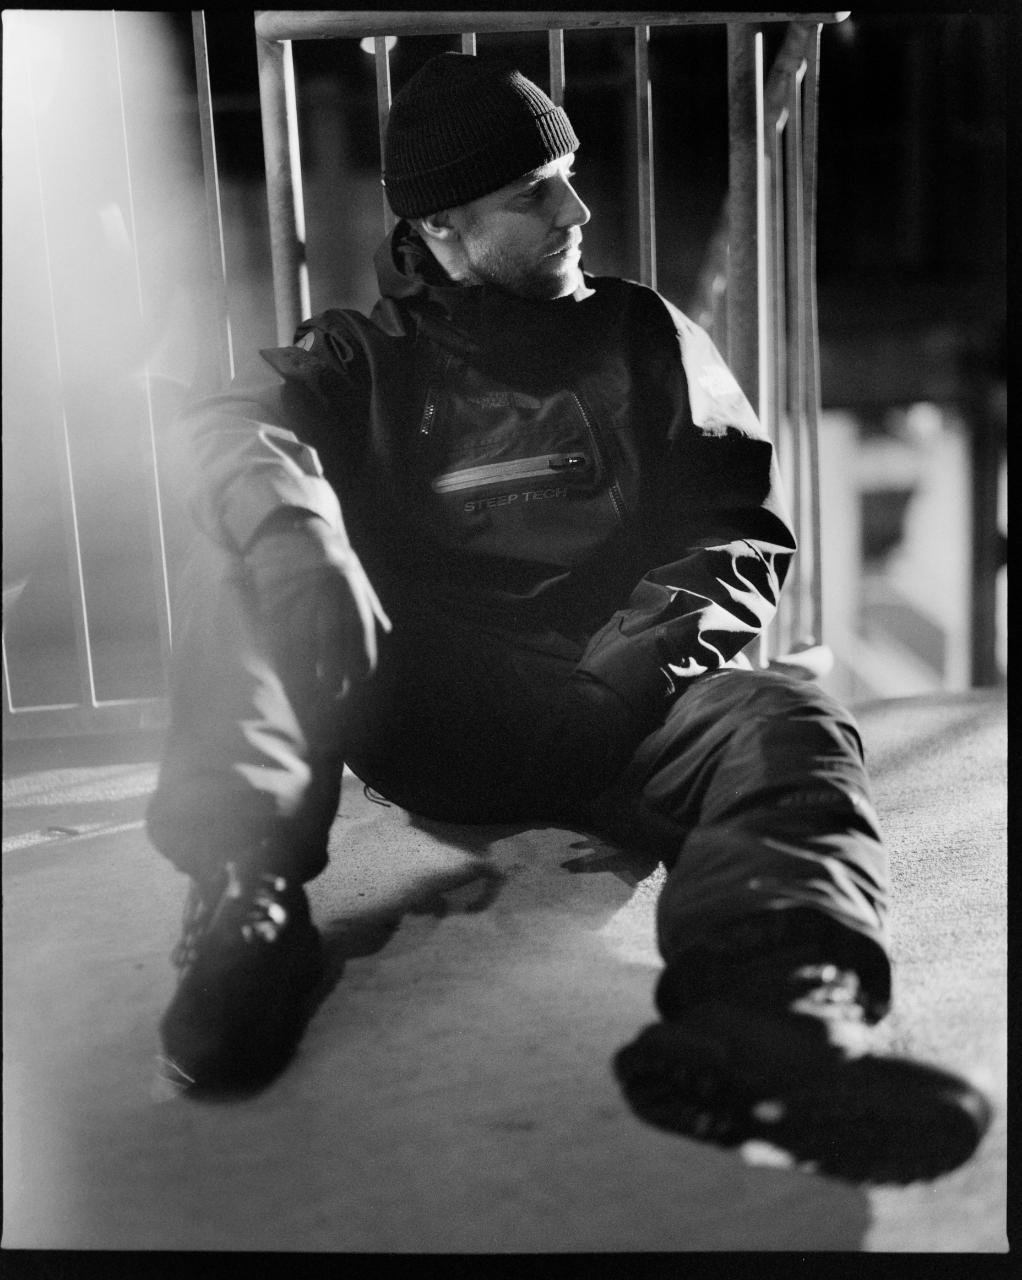 Man seated on ground, wearing a beanie and jacket with text, against a metal structure